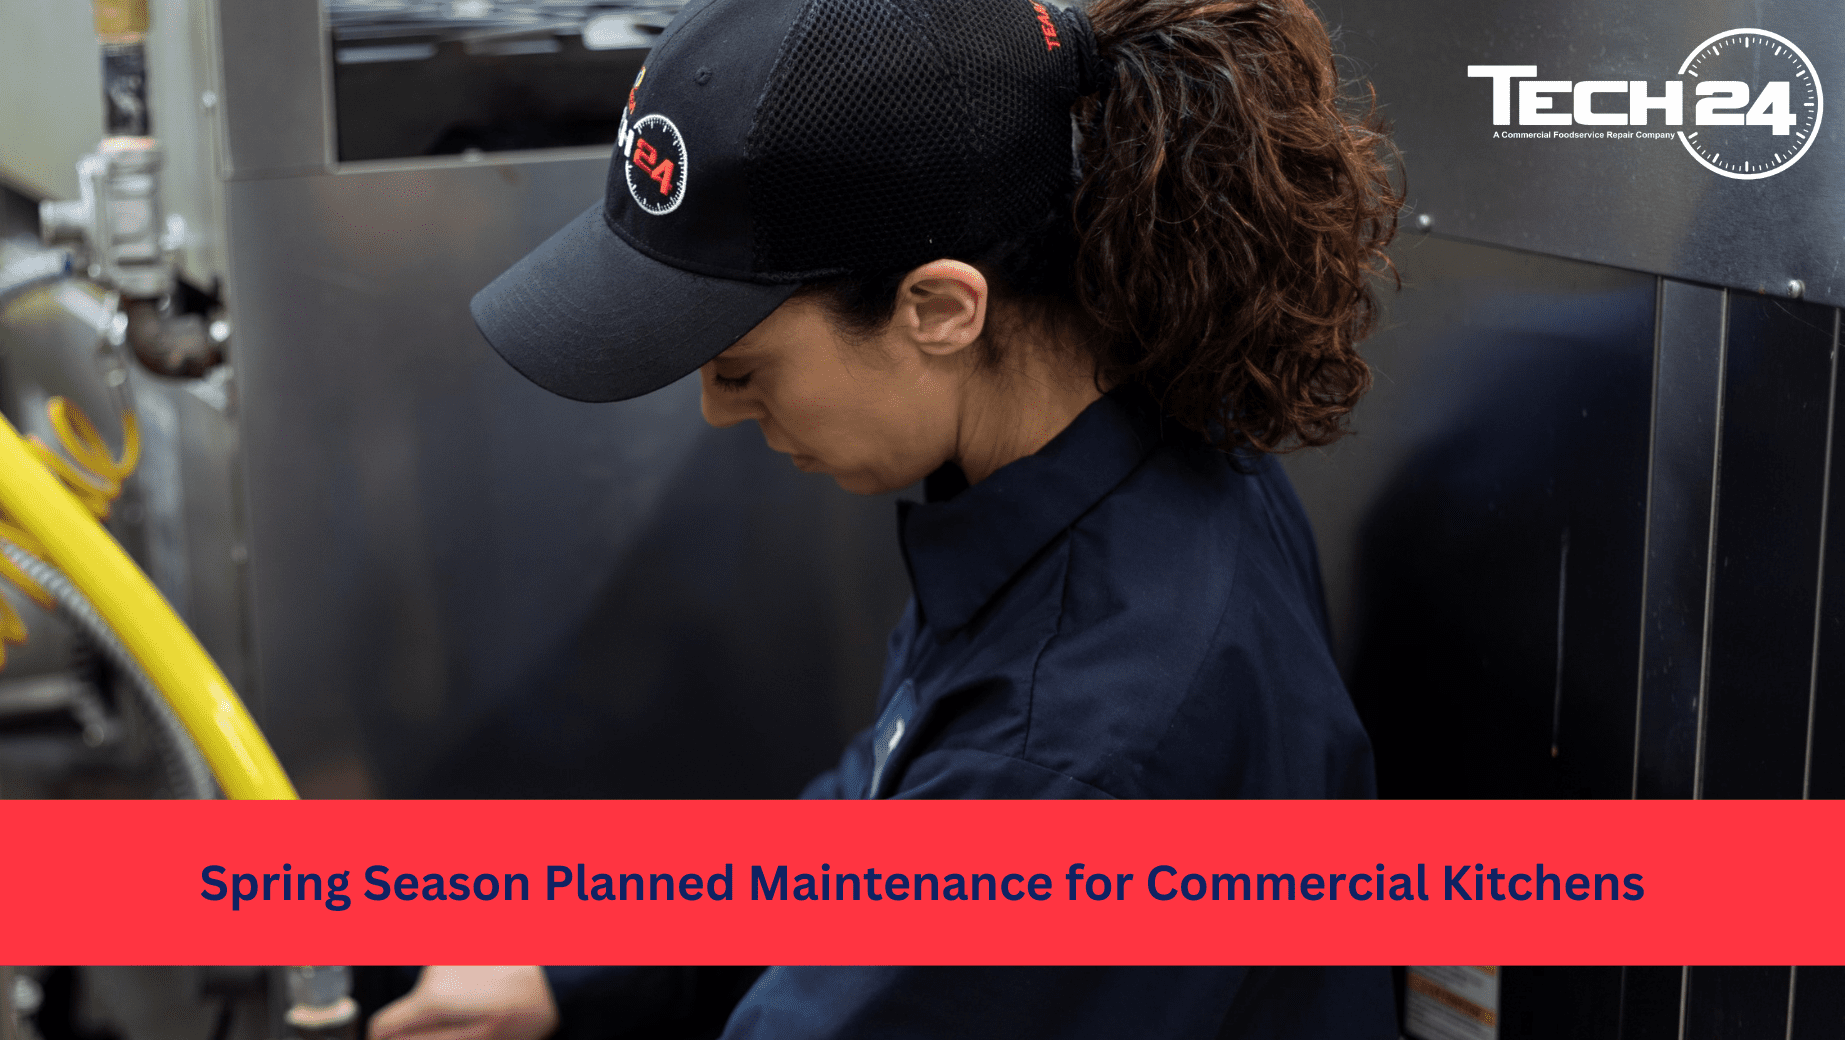 The Importance of Spring Season Planned Maintenance for Commercial Kitchens